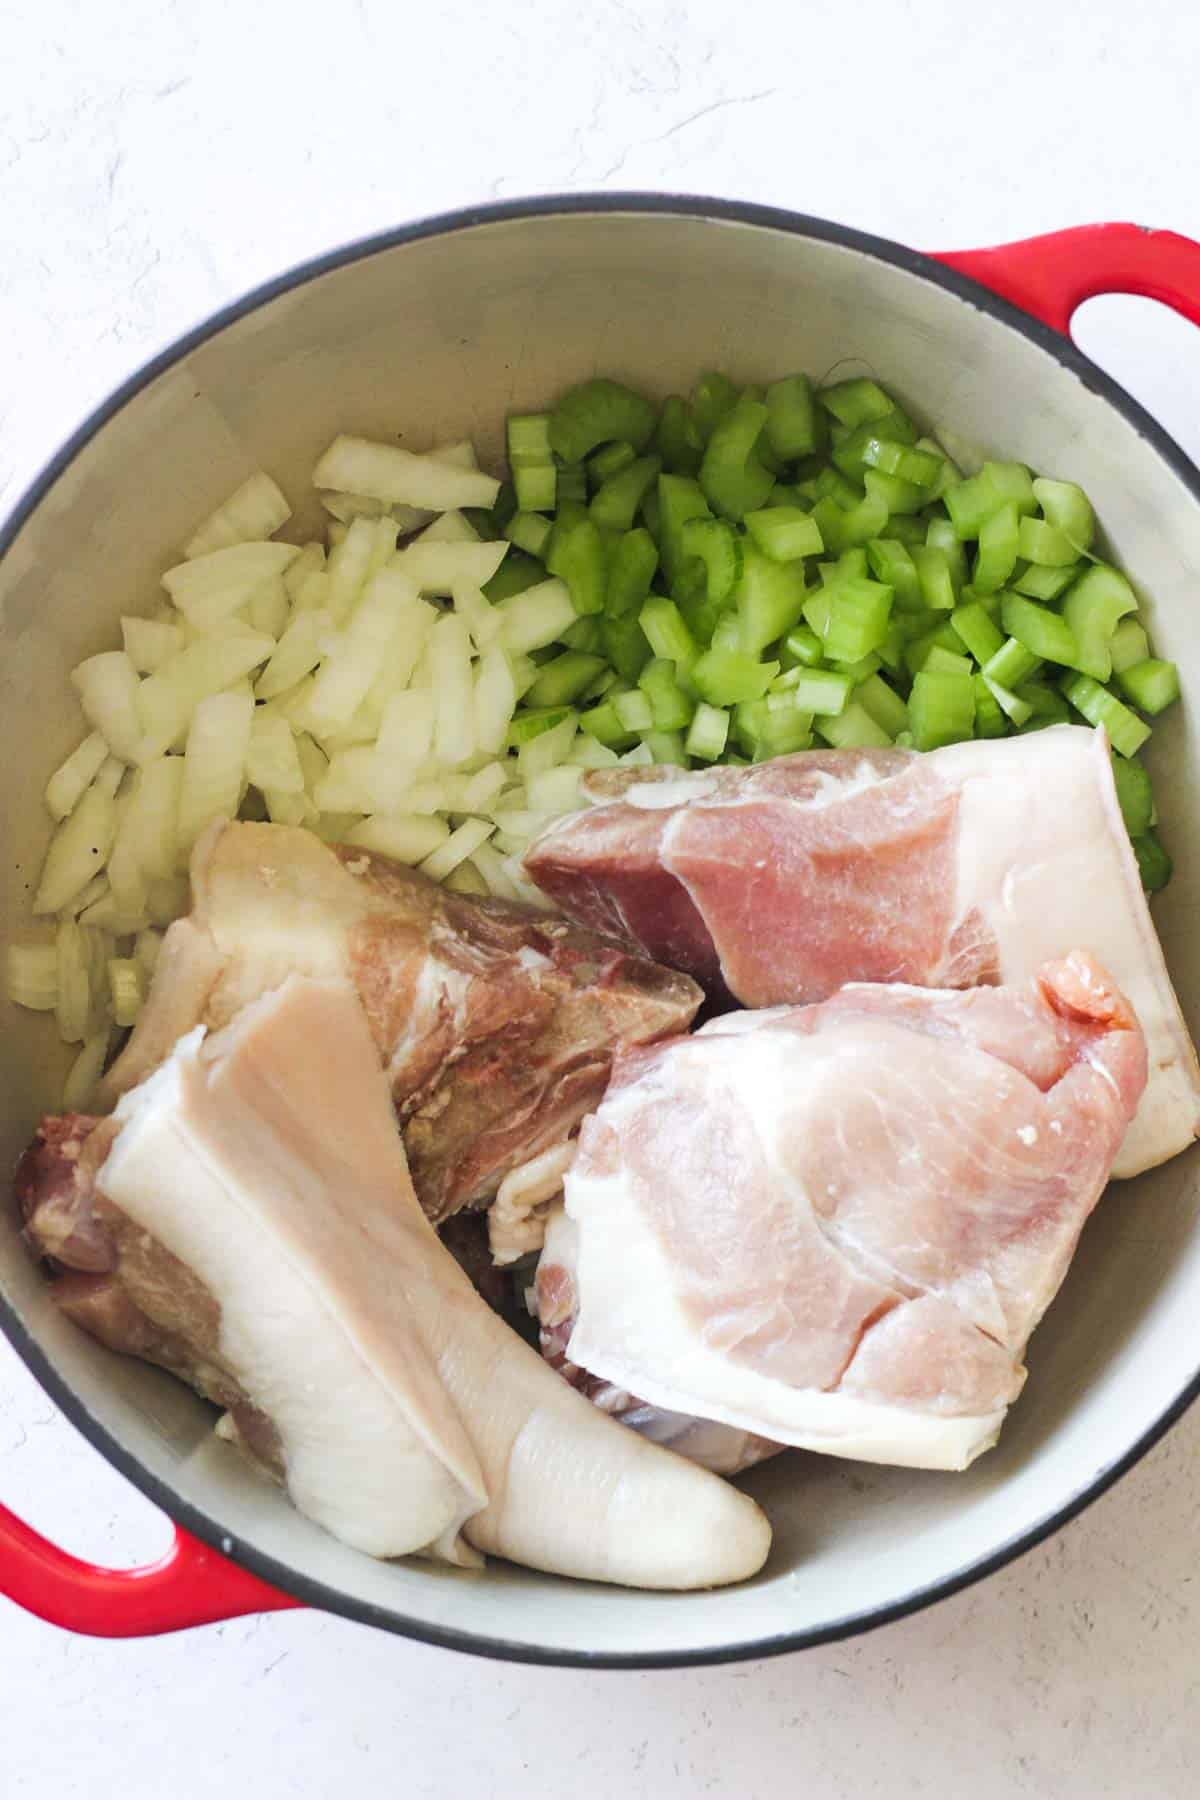 chopped celery, onion and sliced pork in the pot